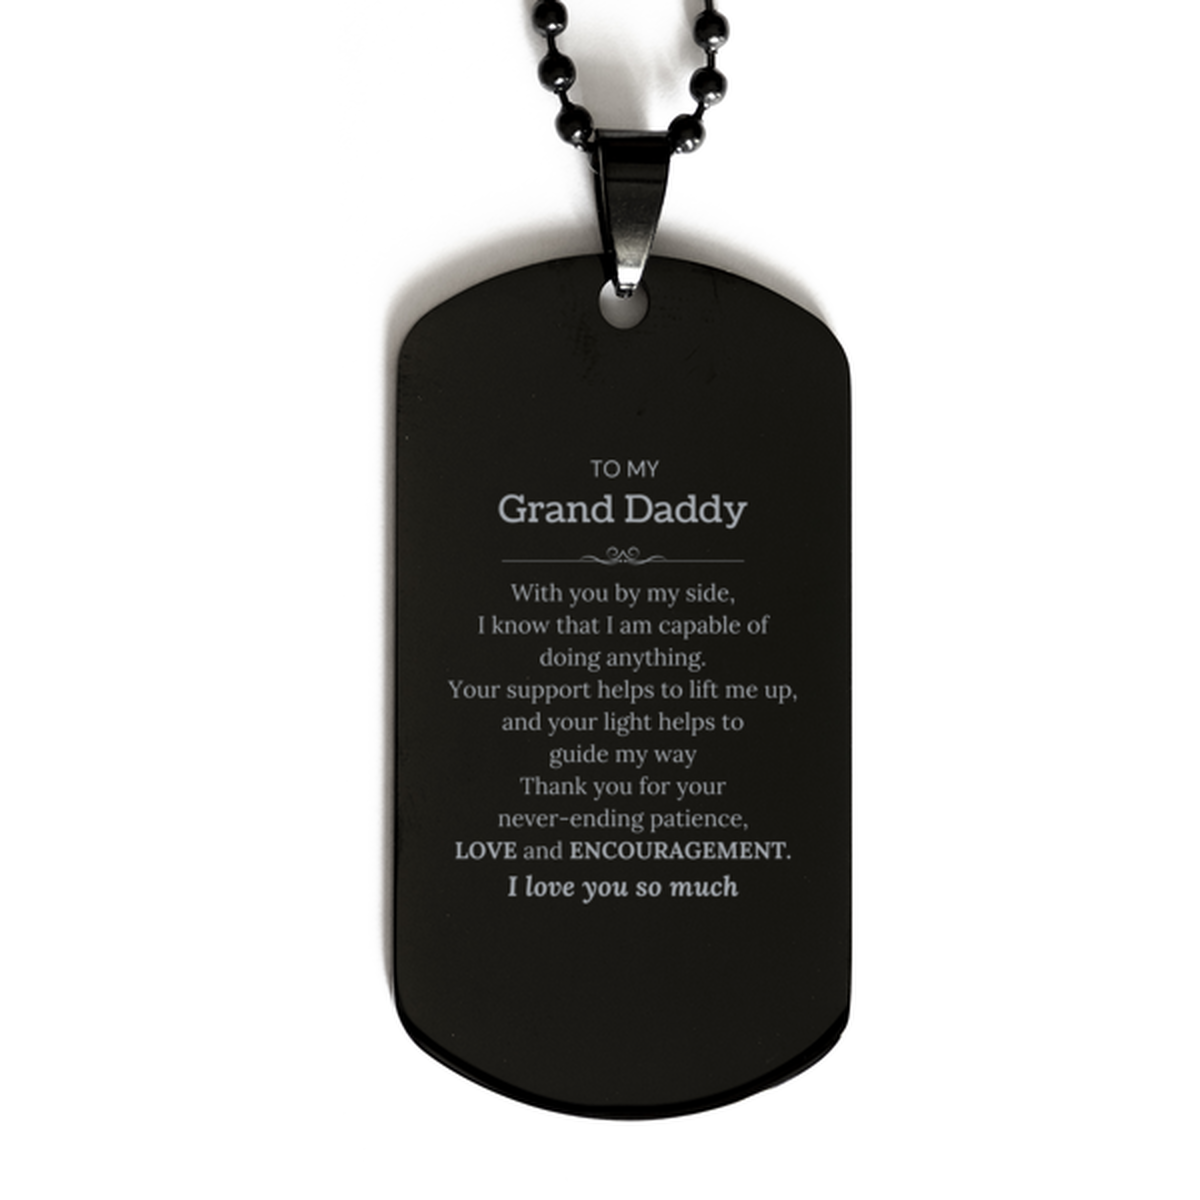 Appreciation Grand Daddy Black Dog Tag Gifts, To My Grand Daddy Birthday Christmas Wedding Keepsake Gifts for Grand Daddy With you by my side, I know that I am capable of doing anything. I love you so much